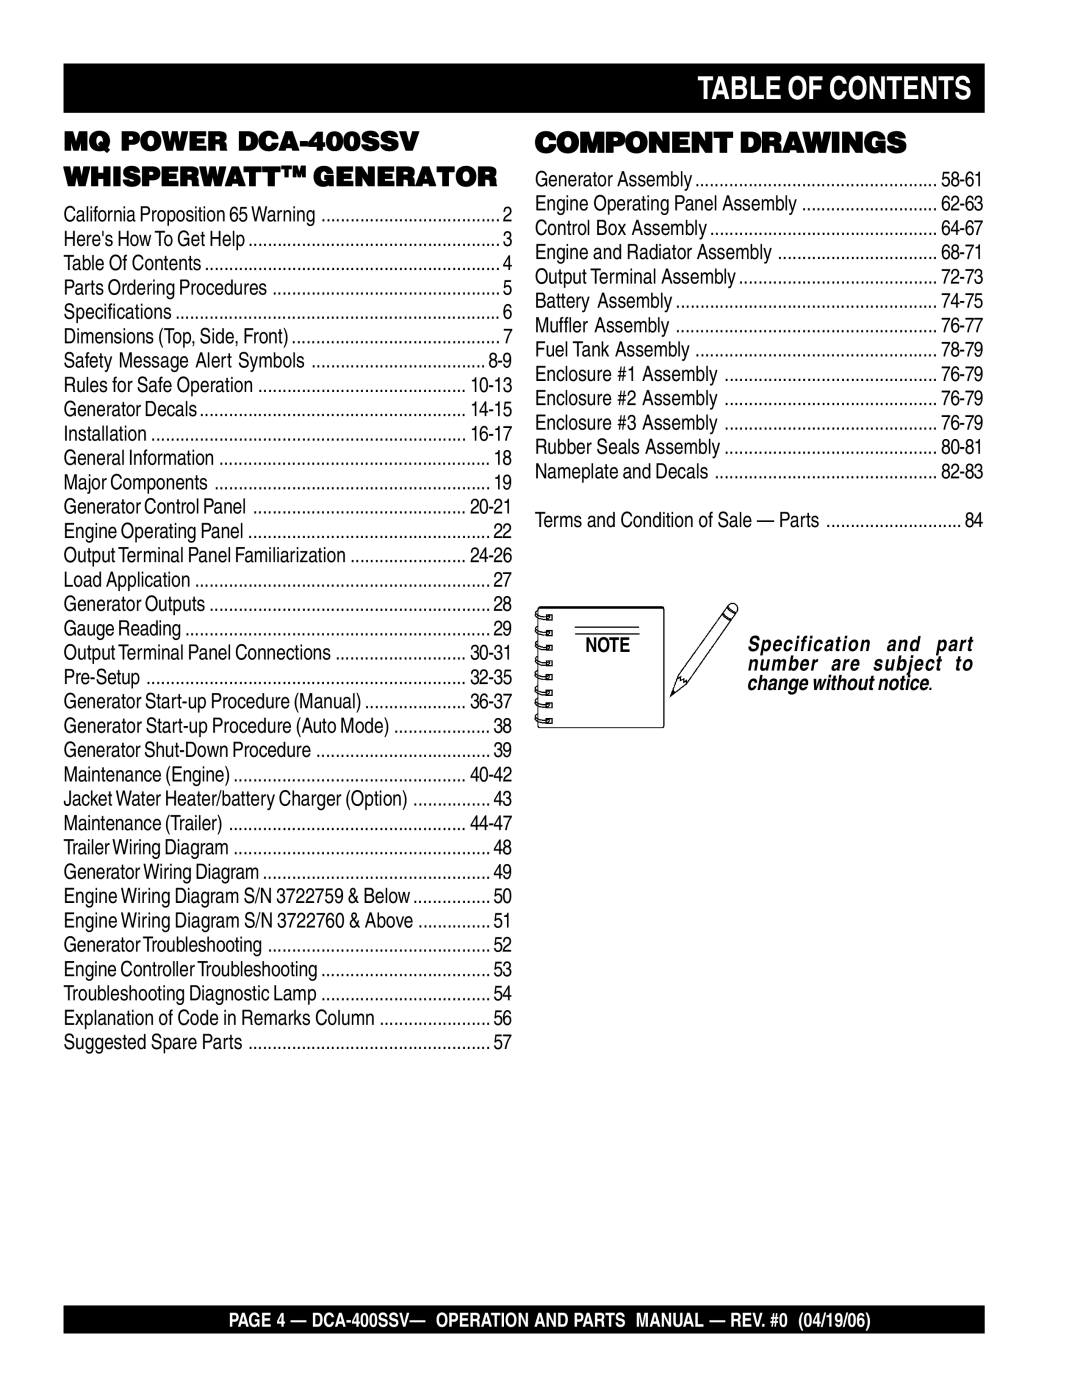 Multiquip DCA-400SSV operation manual Table of Contents 